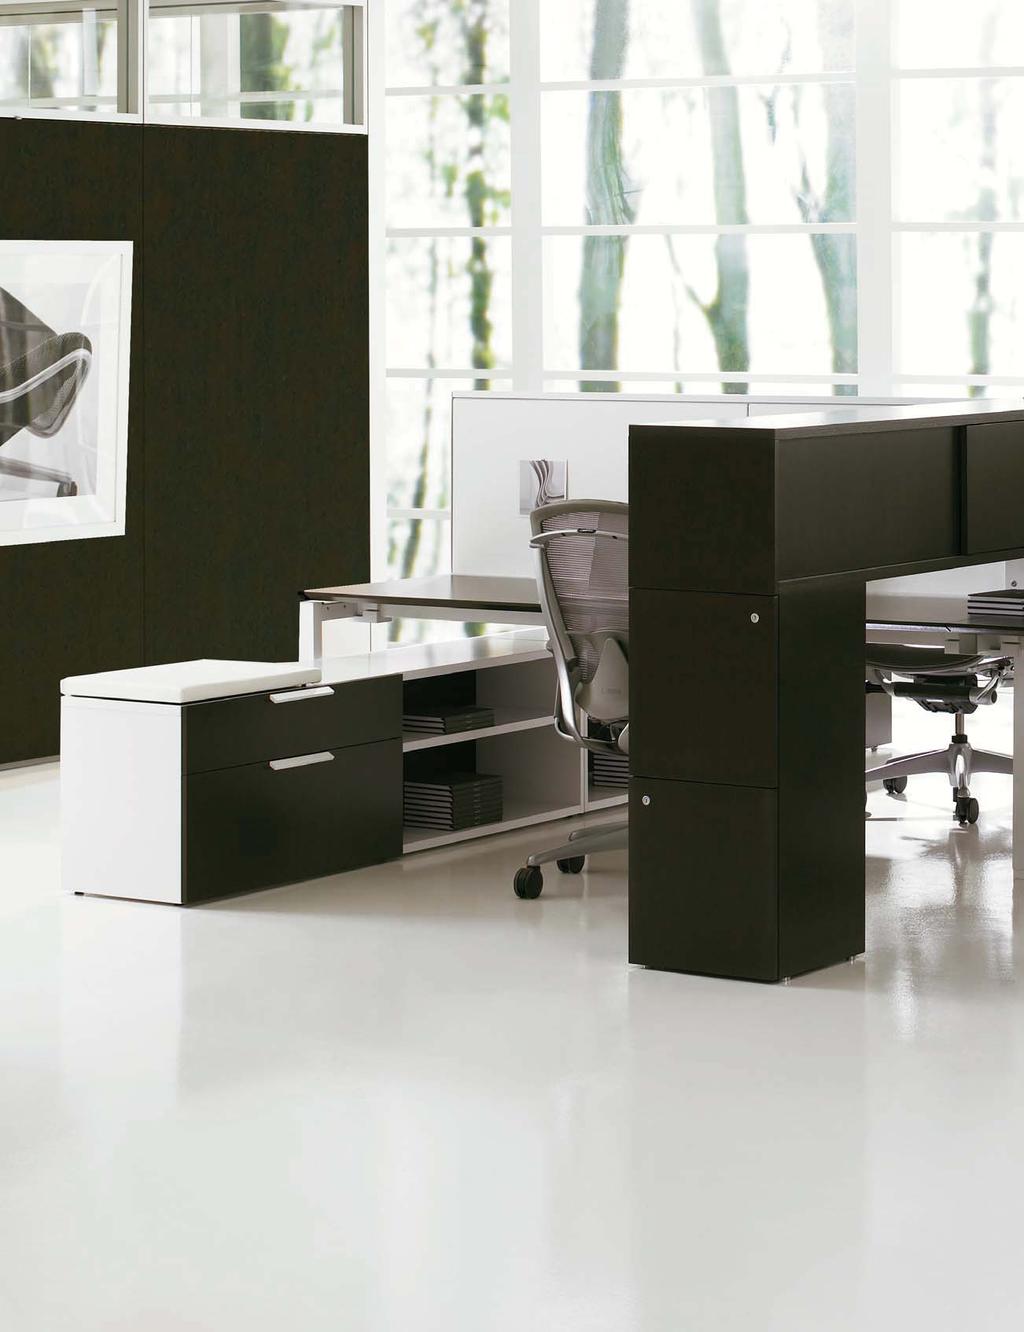 Interpret makes it possible to create exactly the workspace required.